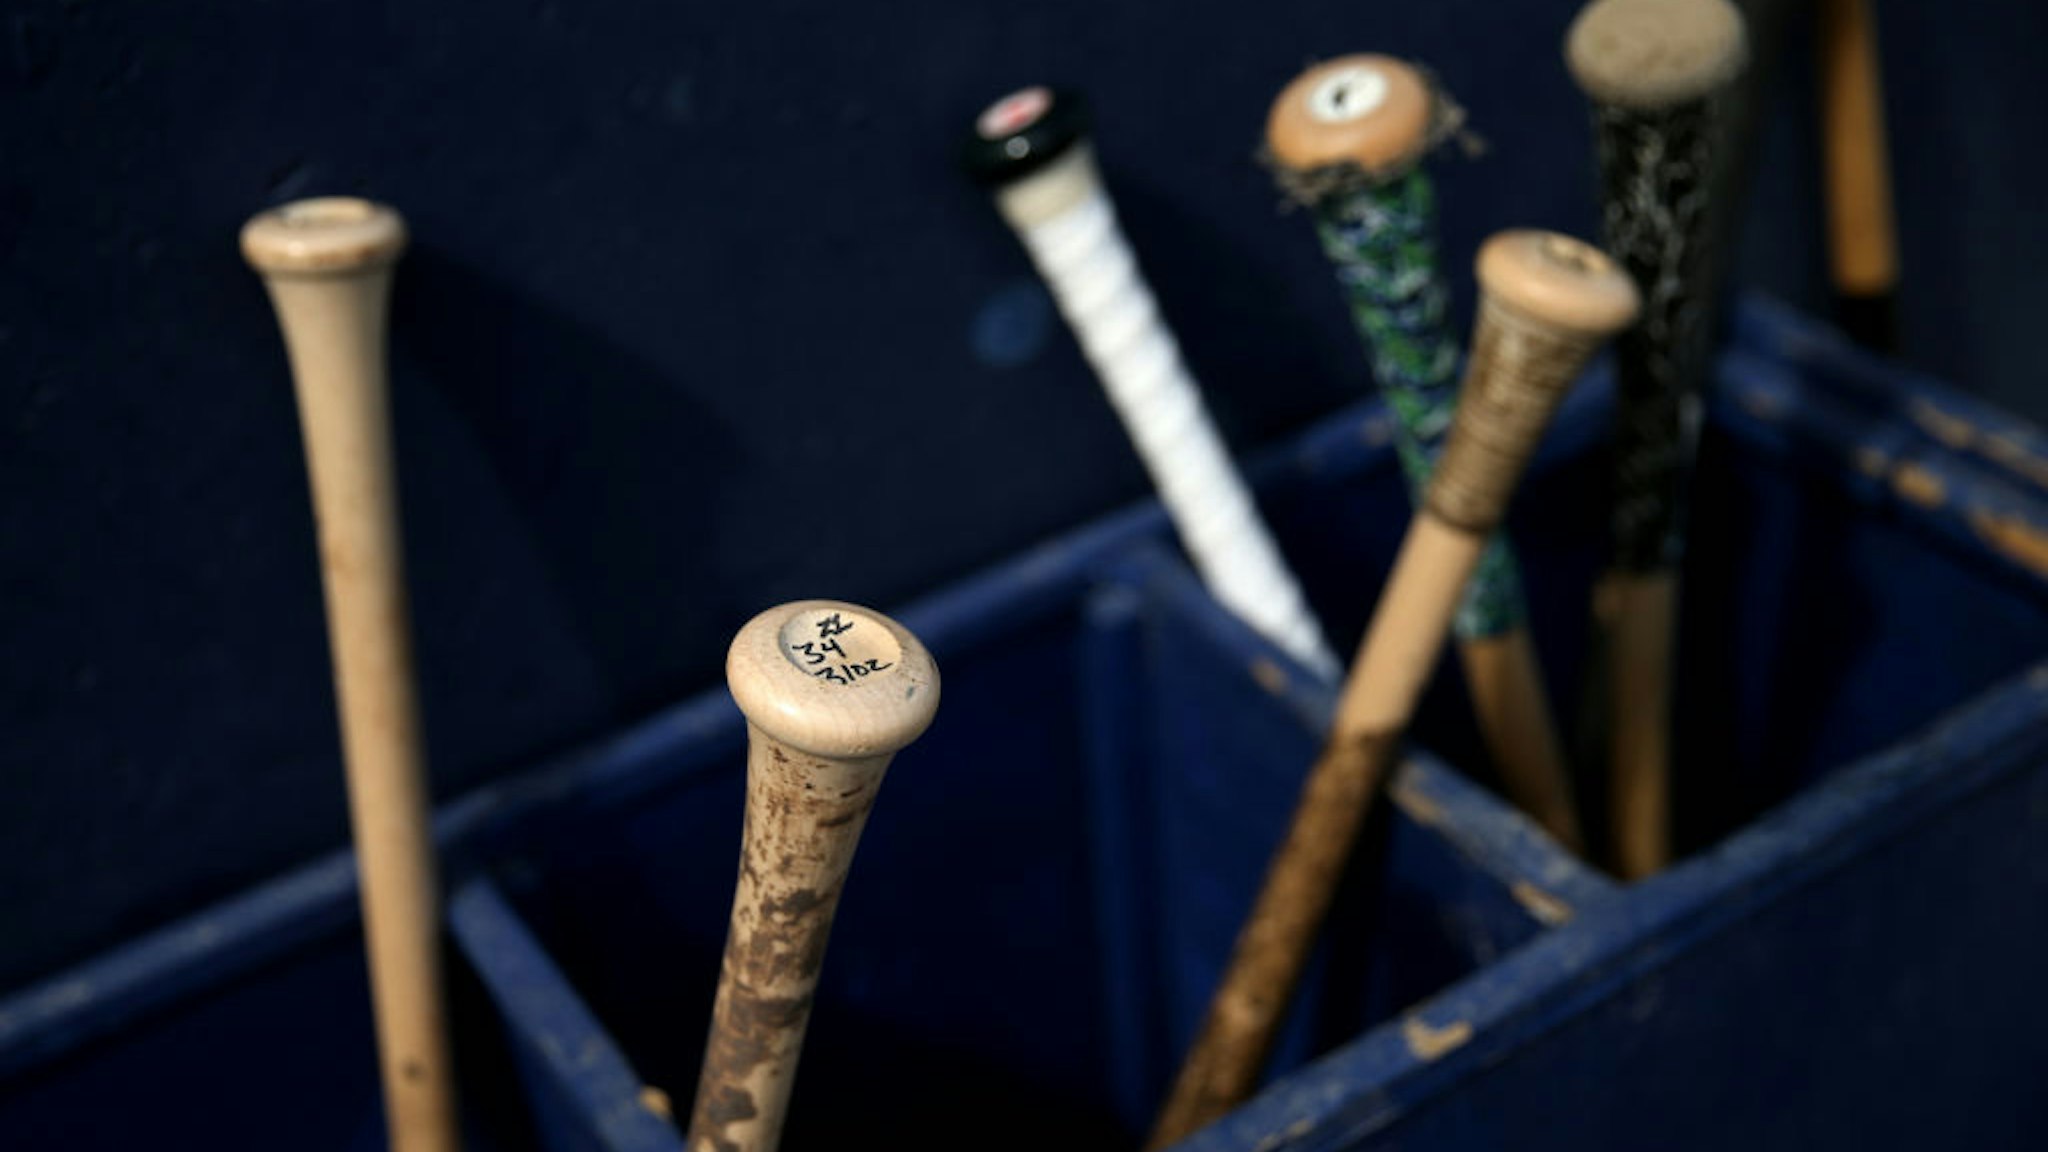 BREWSTER, MA - AUGUST 11: Bats next to the Brewster Whitecaps dugout during game one of the Cape Cod League Championship Series against the Bourne Braves at Stony Brook Field on August 11, 2017 in Brewster, Massachusetts. Cape Cod League games are a popular destination for MLB scouts. The collection of some of the country's top college players combined with the league's use of wooden bats help indicate a prospects success in the big leagues.